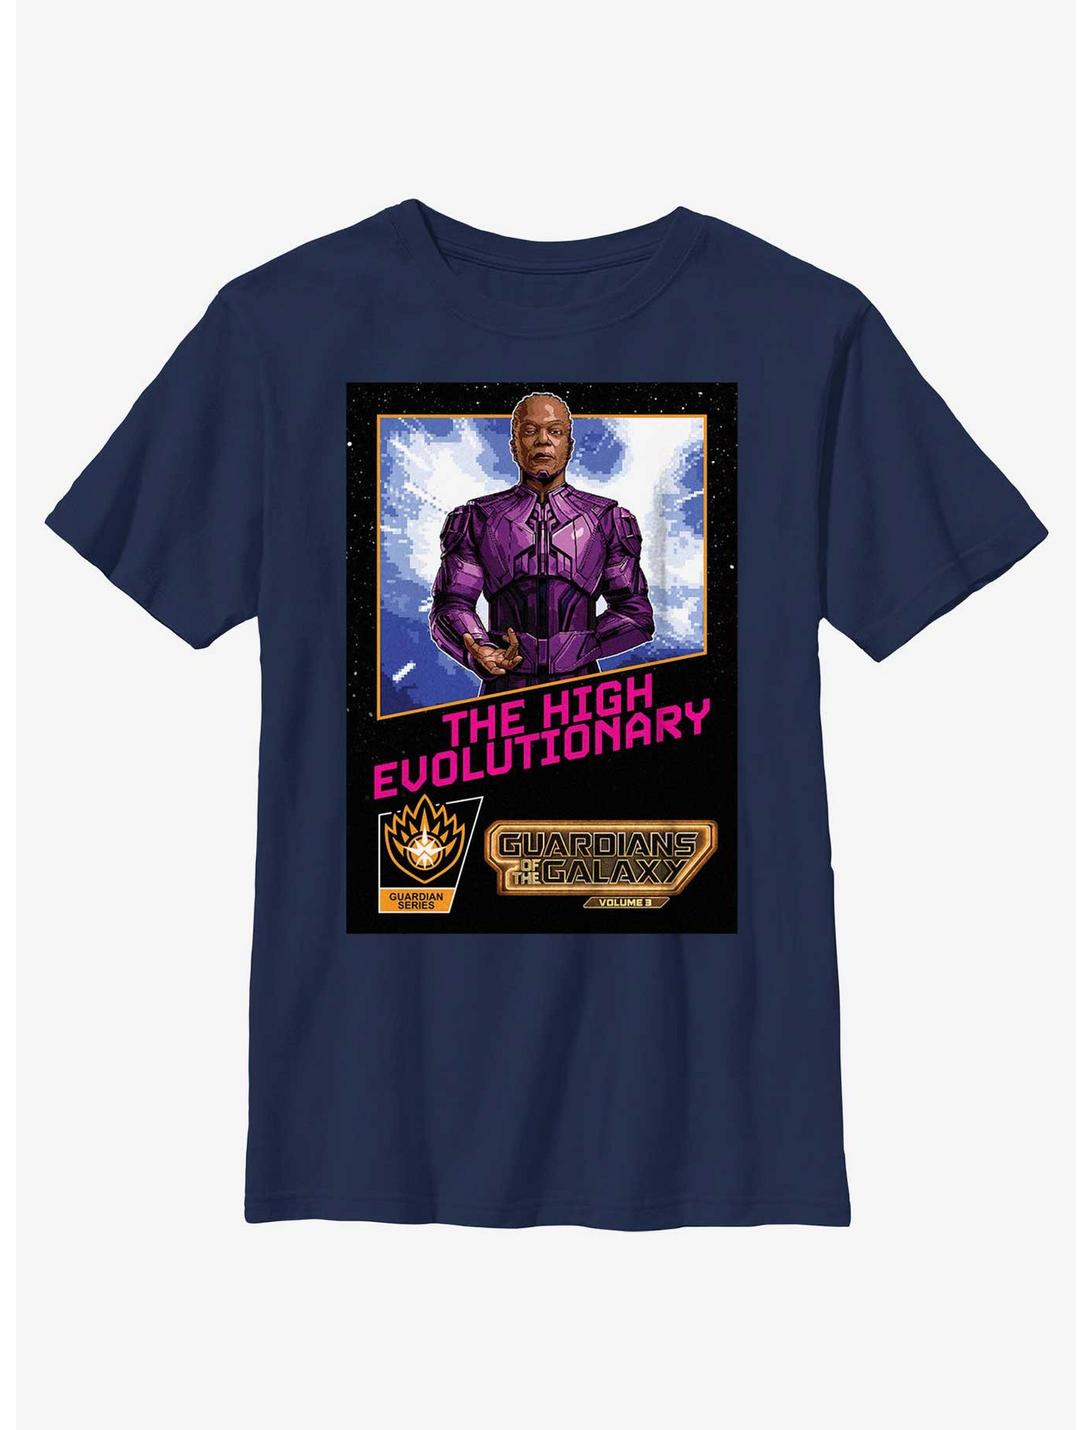 Marvel Guardians of the Galaxy Vol. 3 High Evolutionary Cosmic Poster Youth T-Shirt, NAVY, hi-res